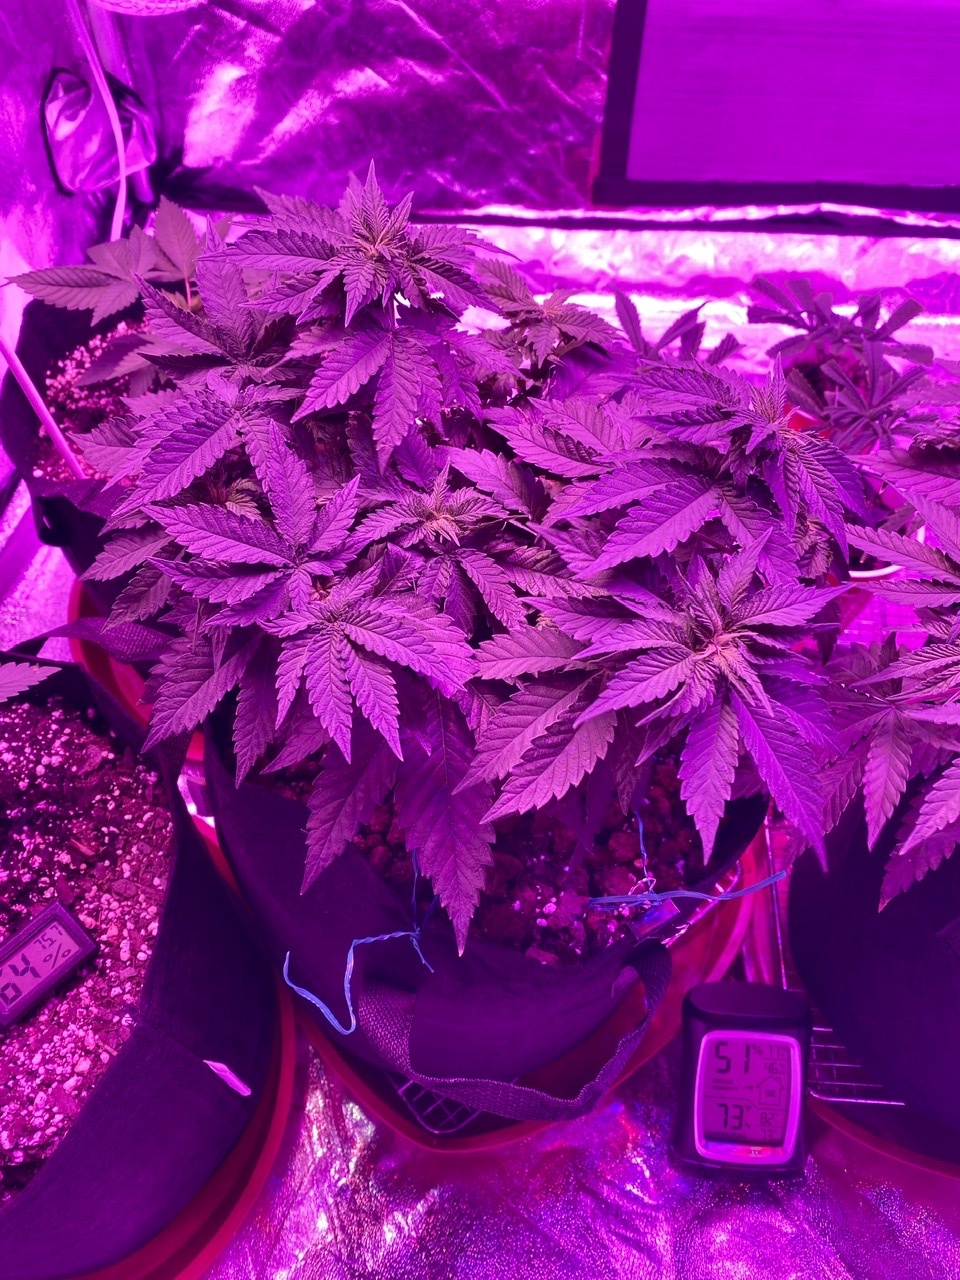 Quick update after lst and feedings thanks for all the knowledge ive found here happy growing 2